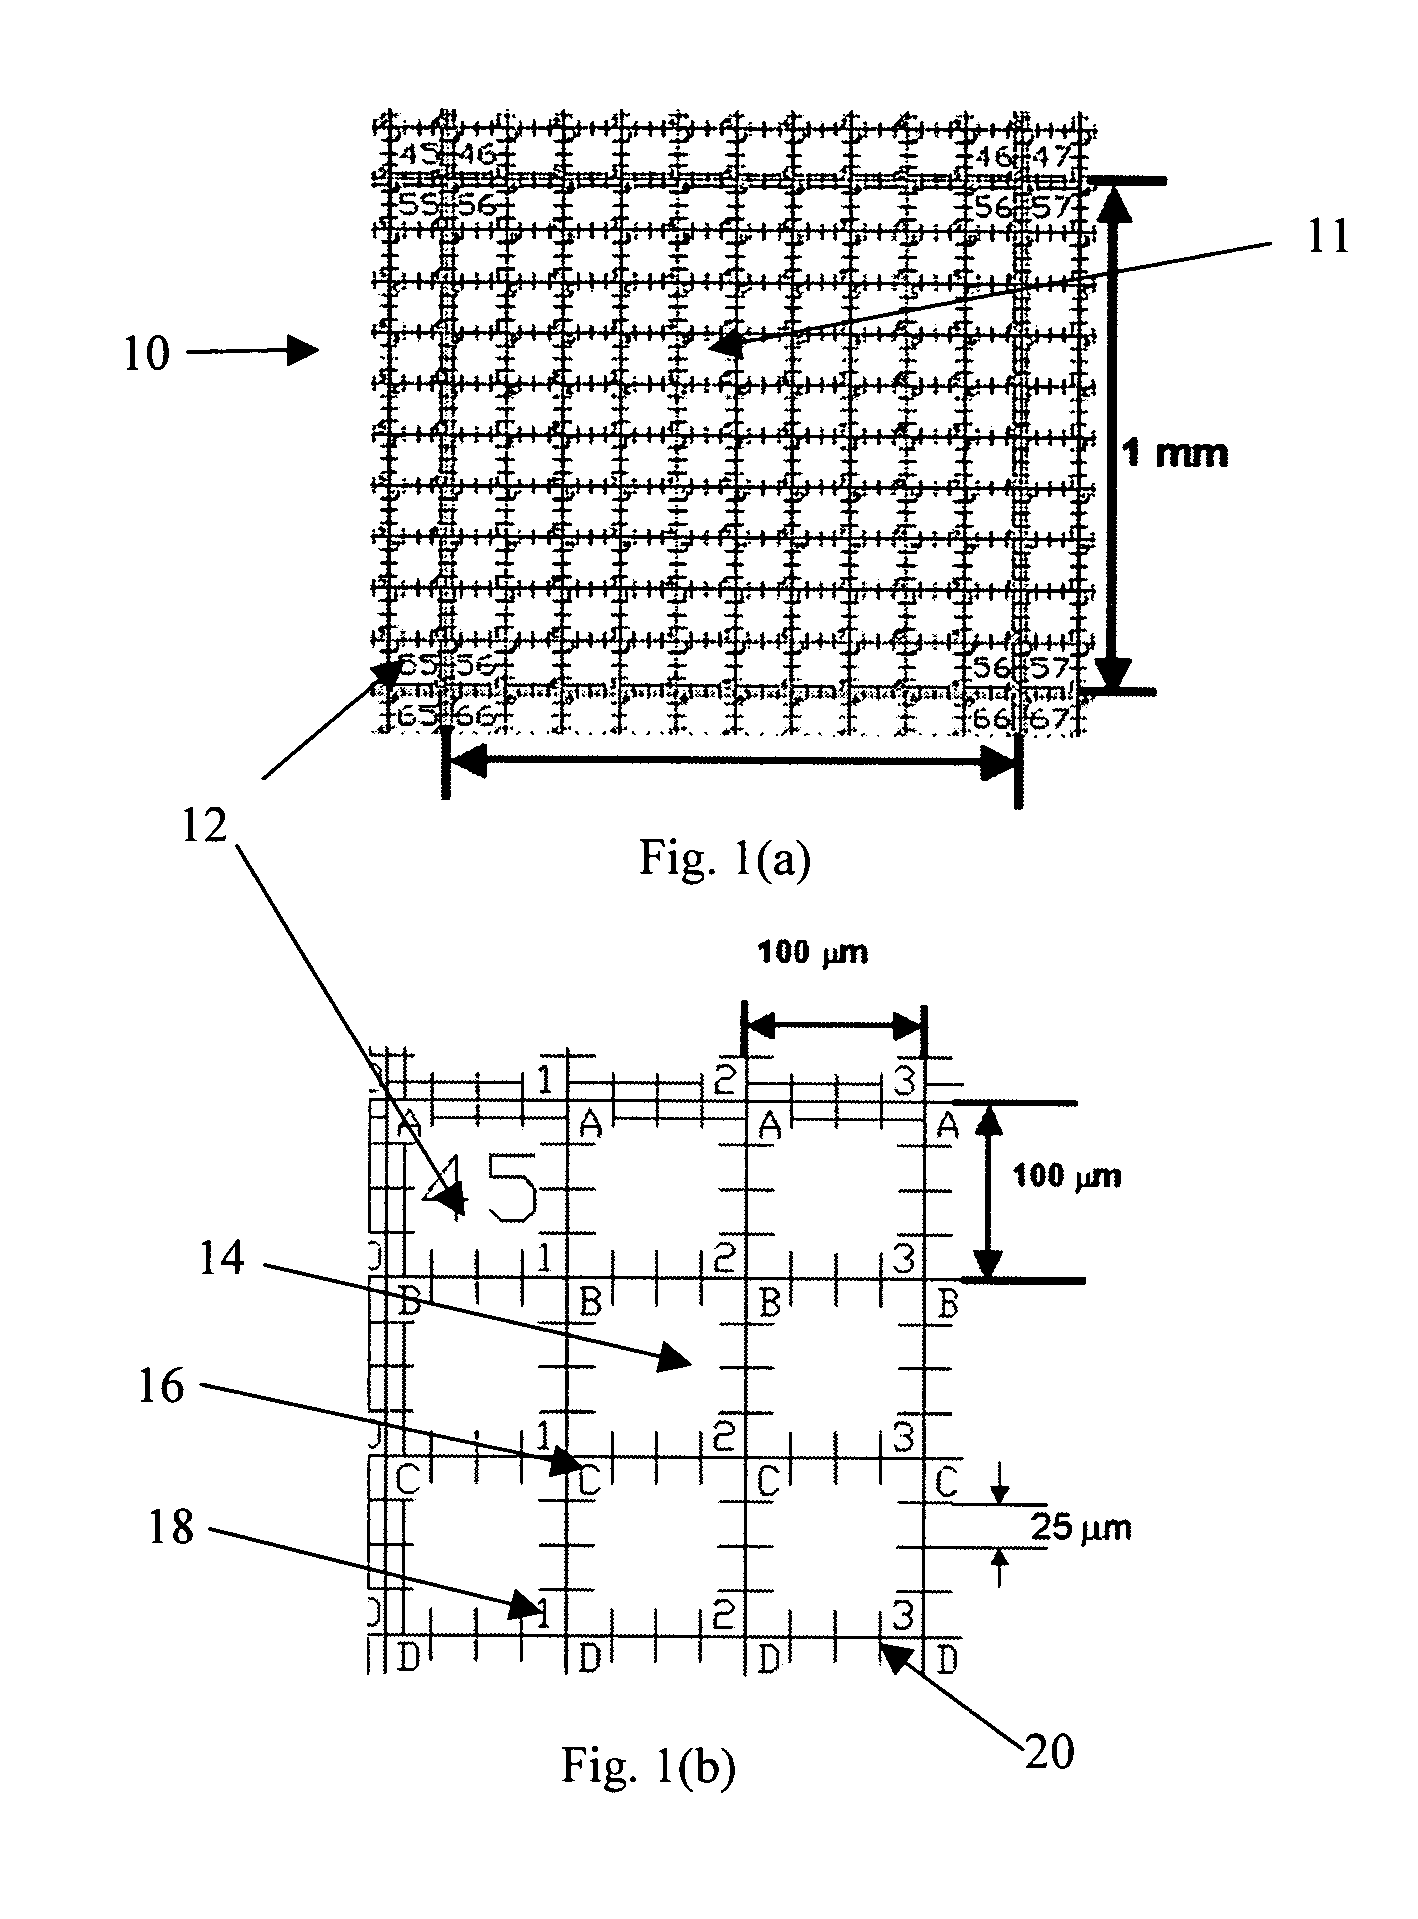 Micro-pattern embedded plastic optical film device for cell-based assays